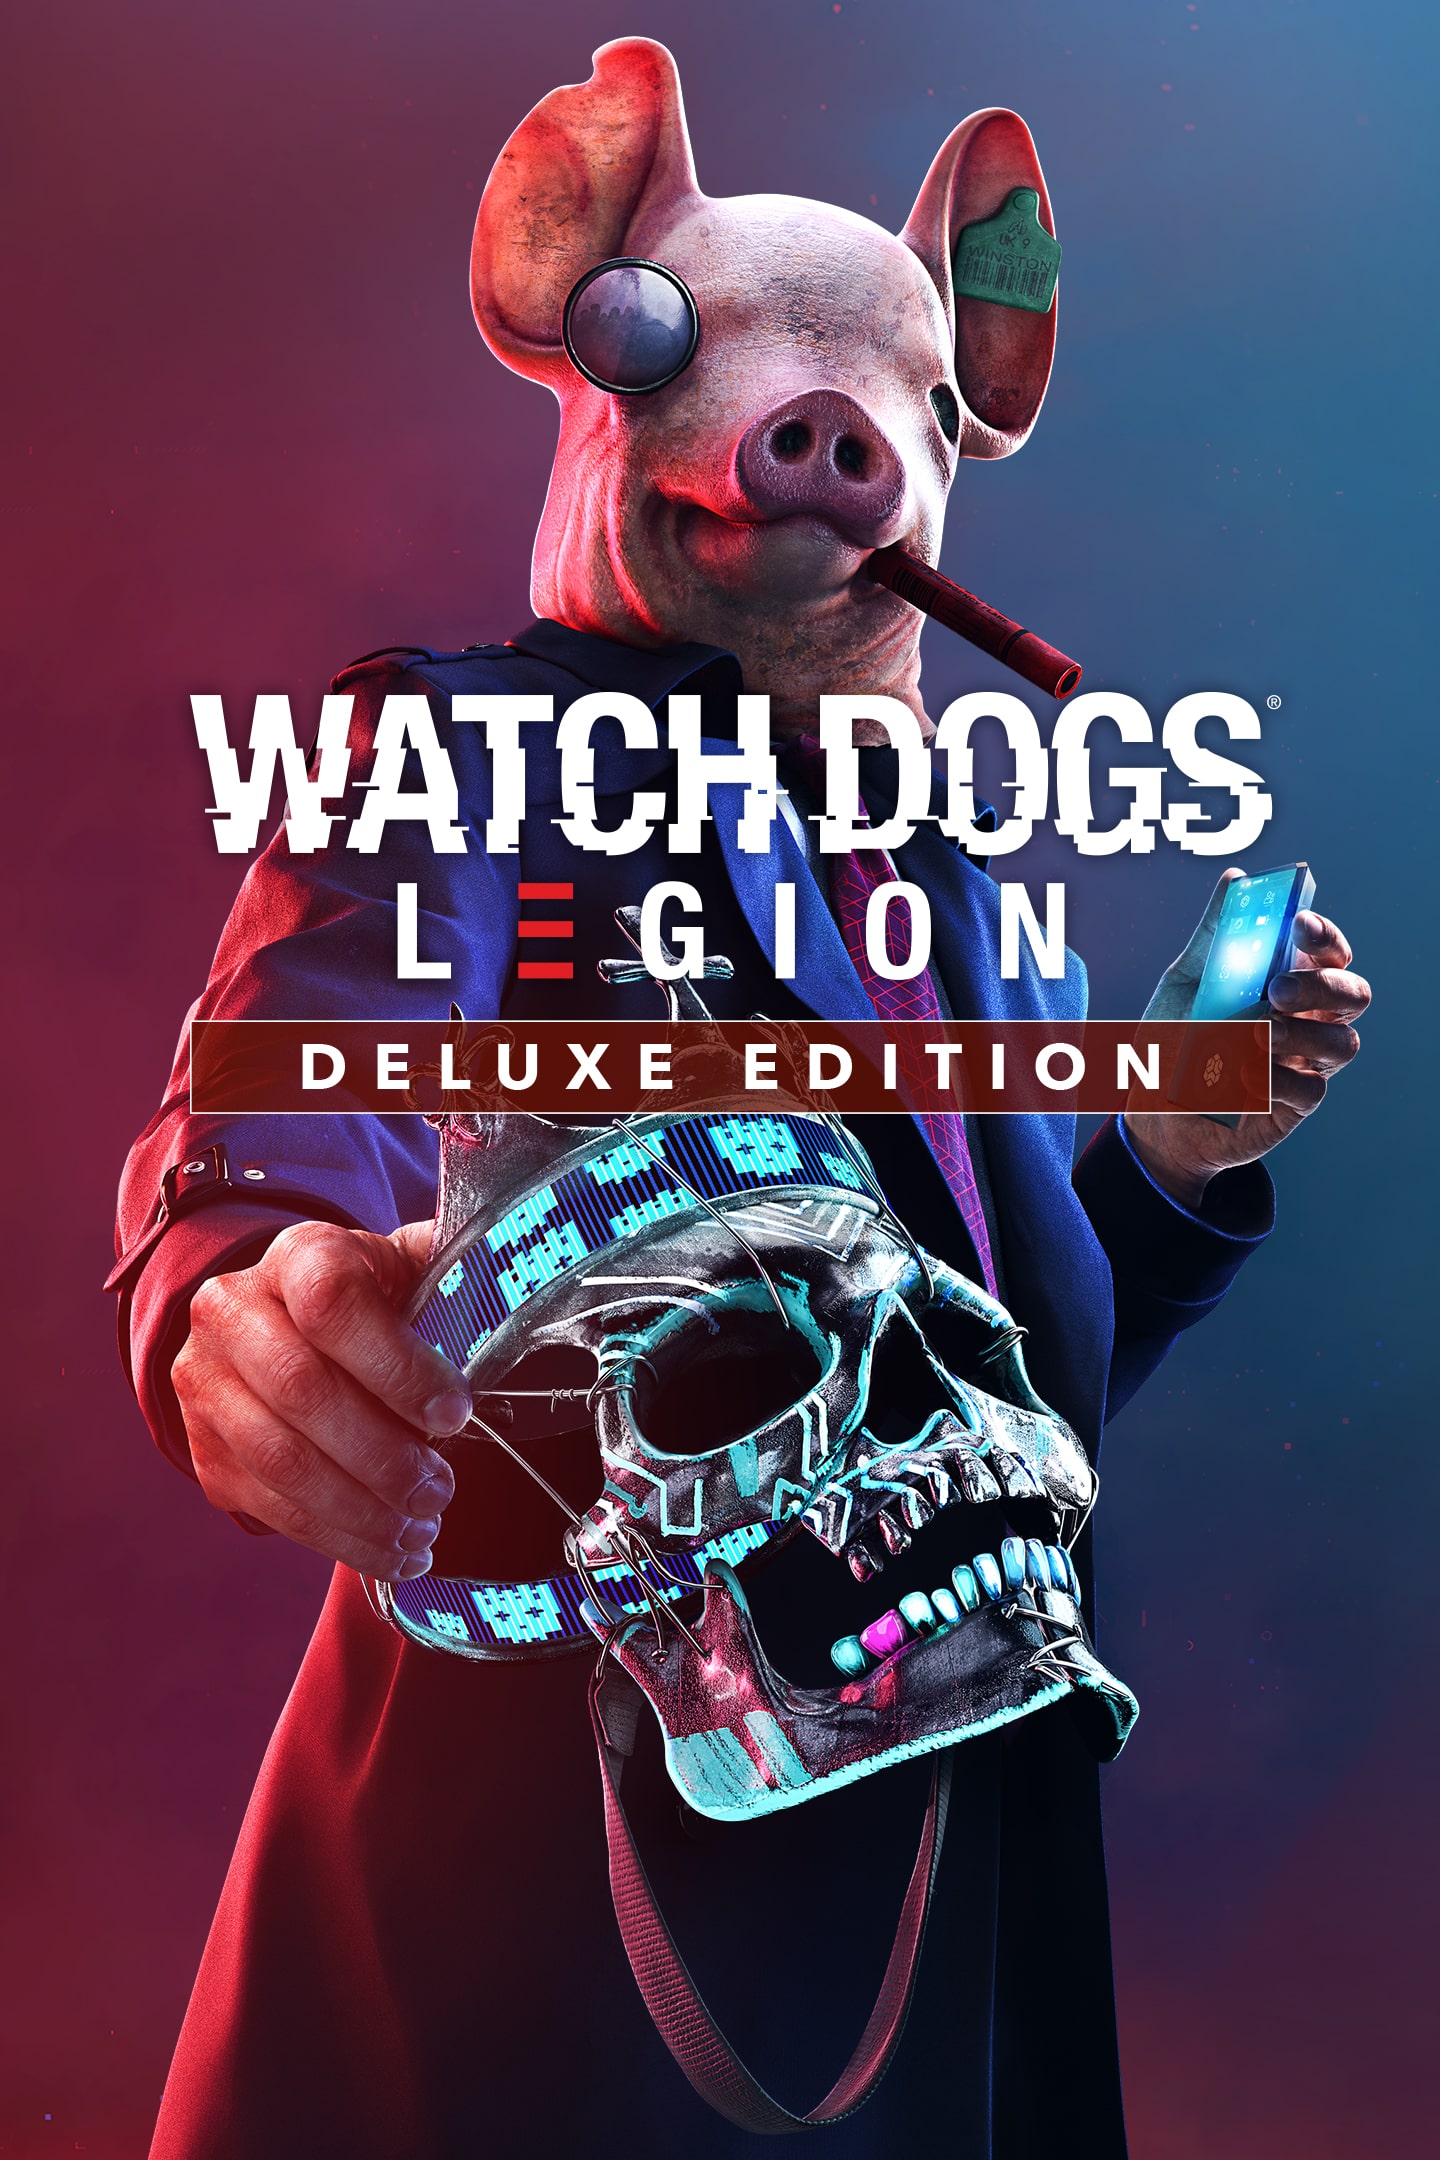 Watch Dogs®: Legion Deluxe Edition